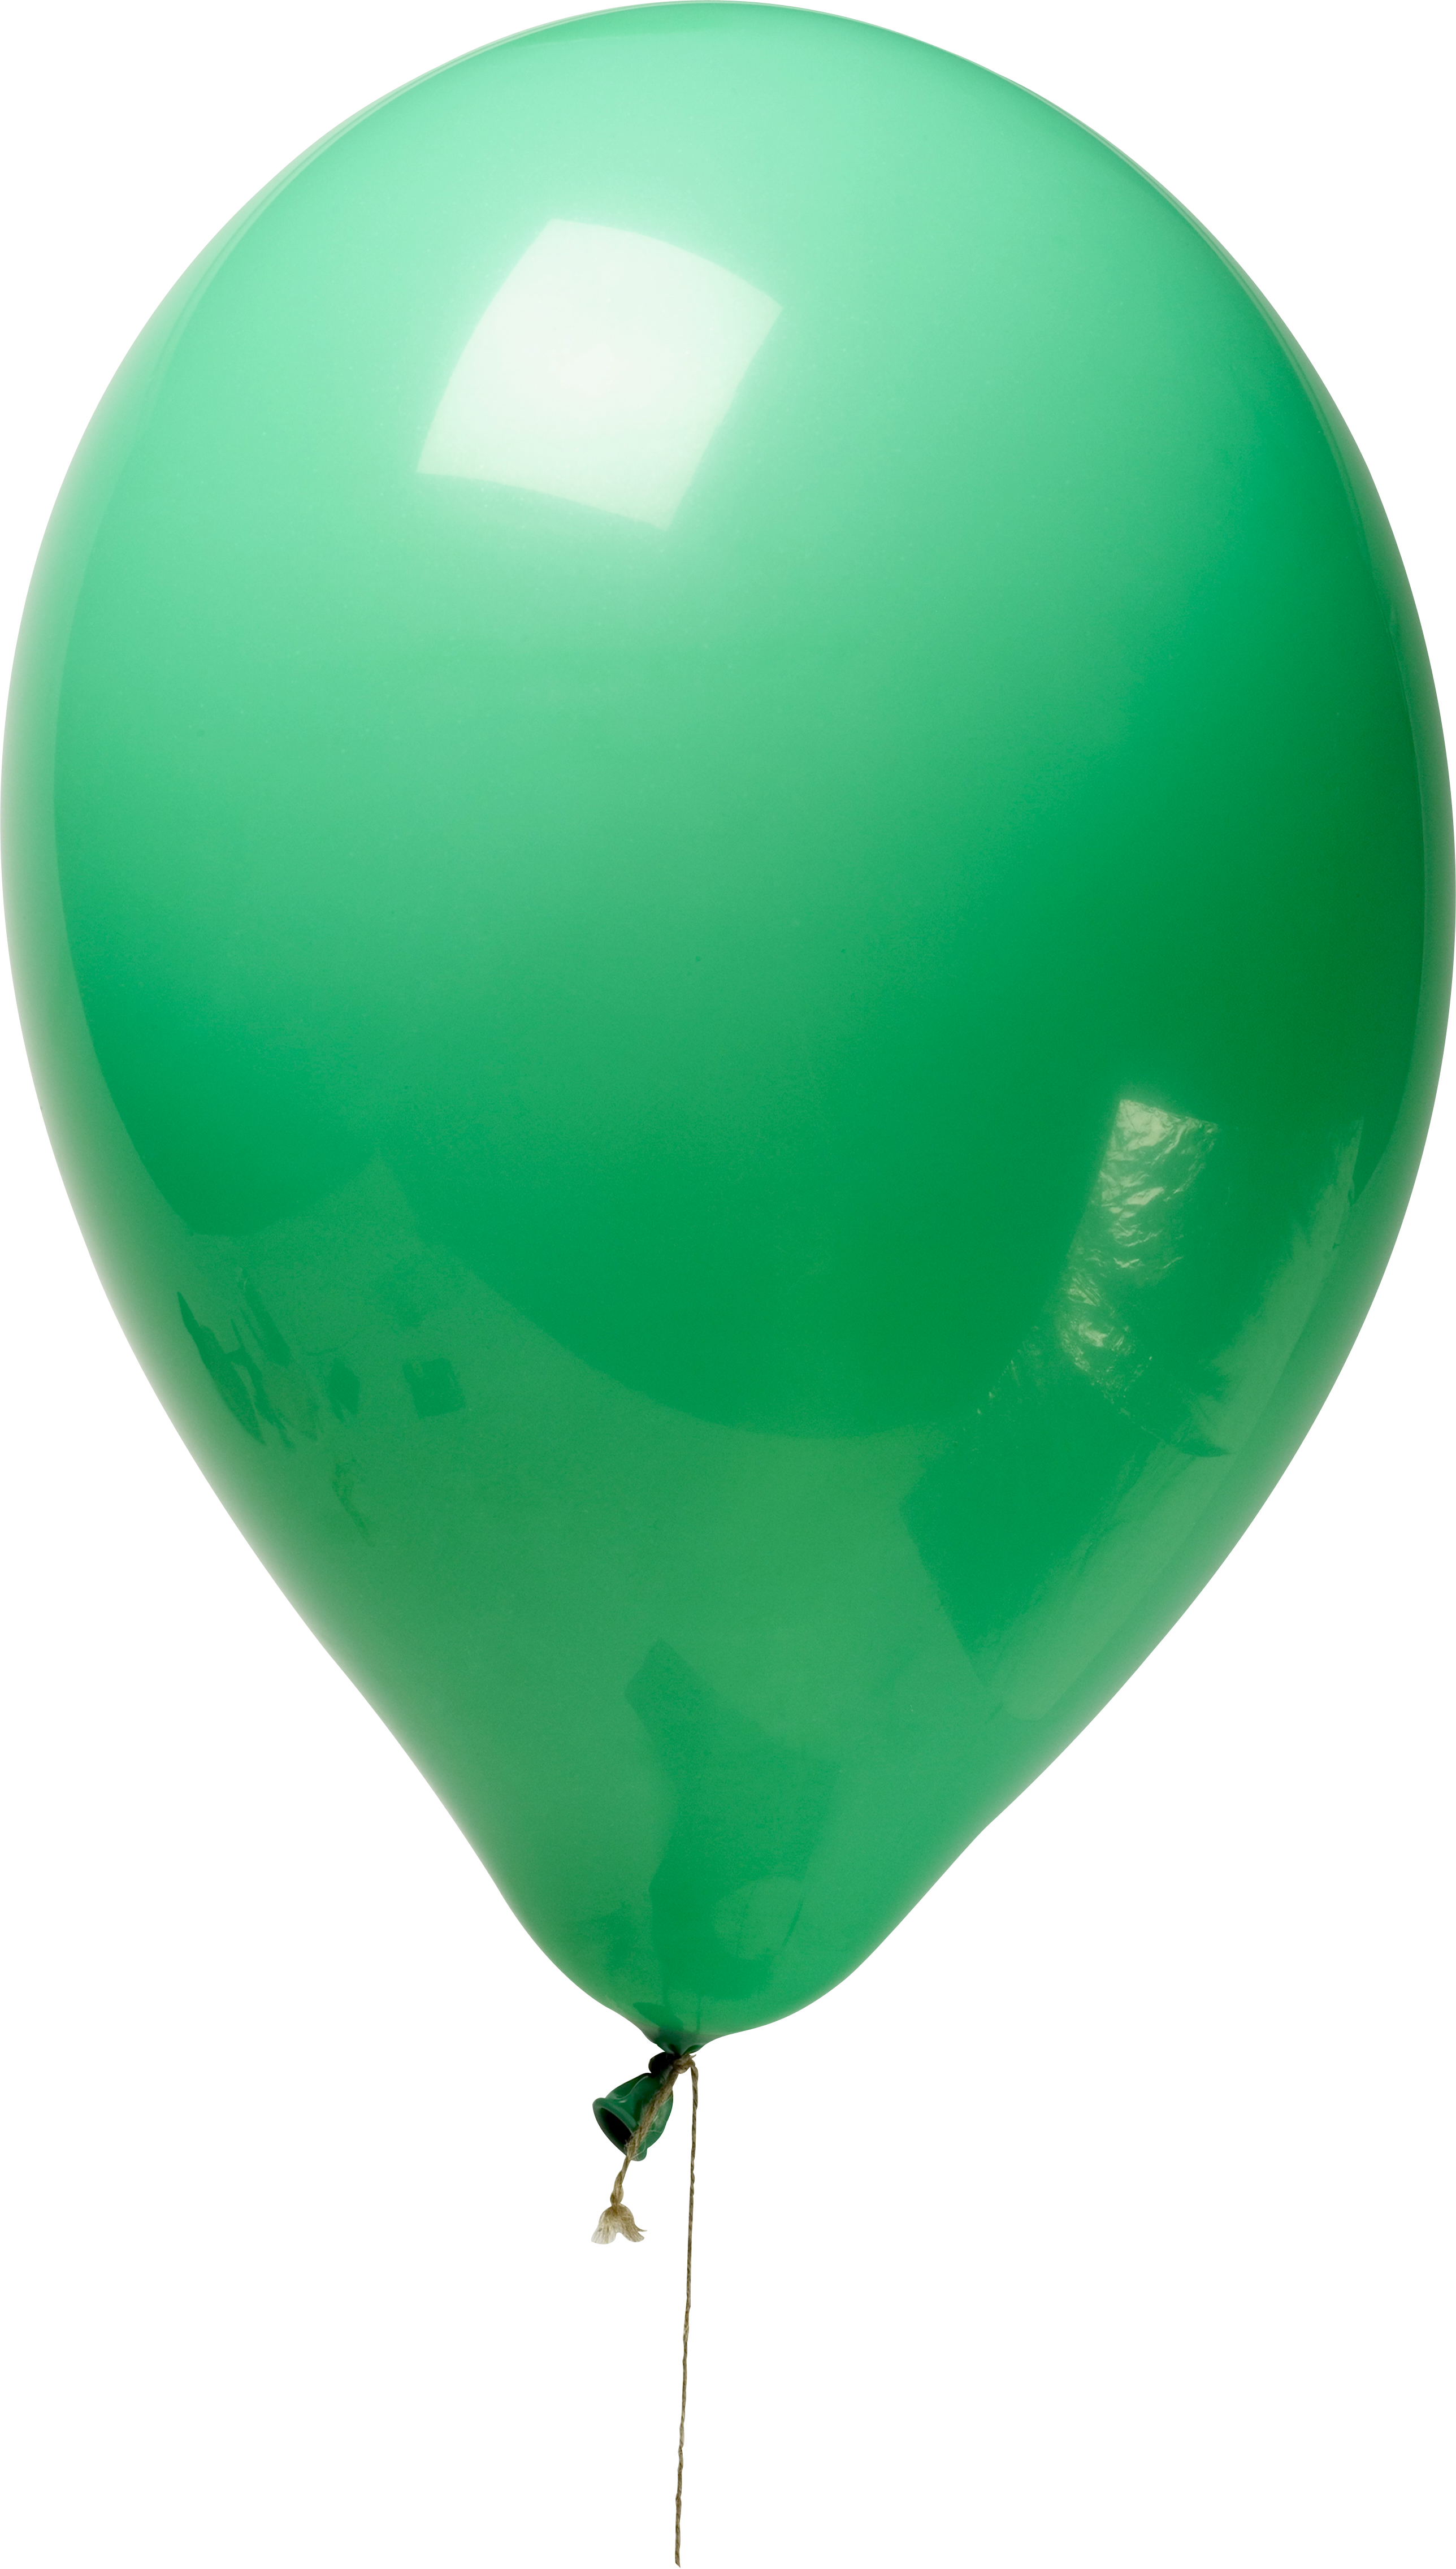 Green Balloons PNG Free Download